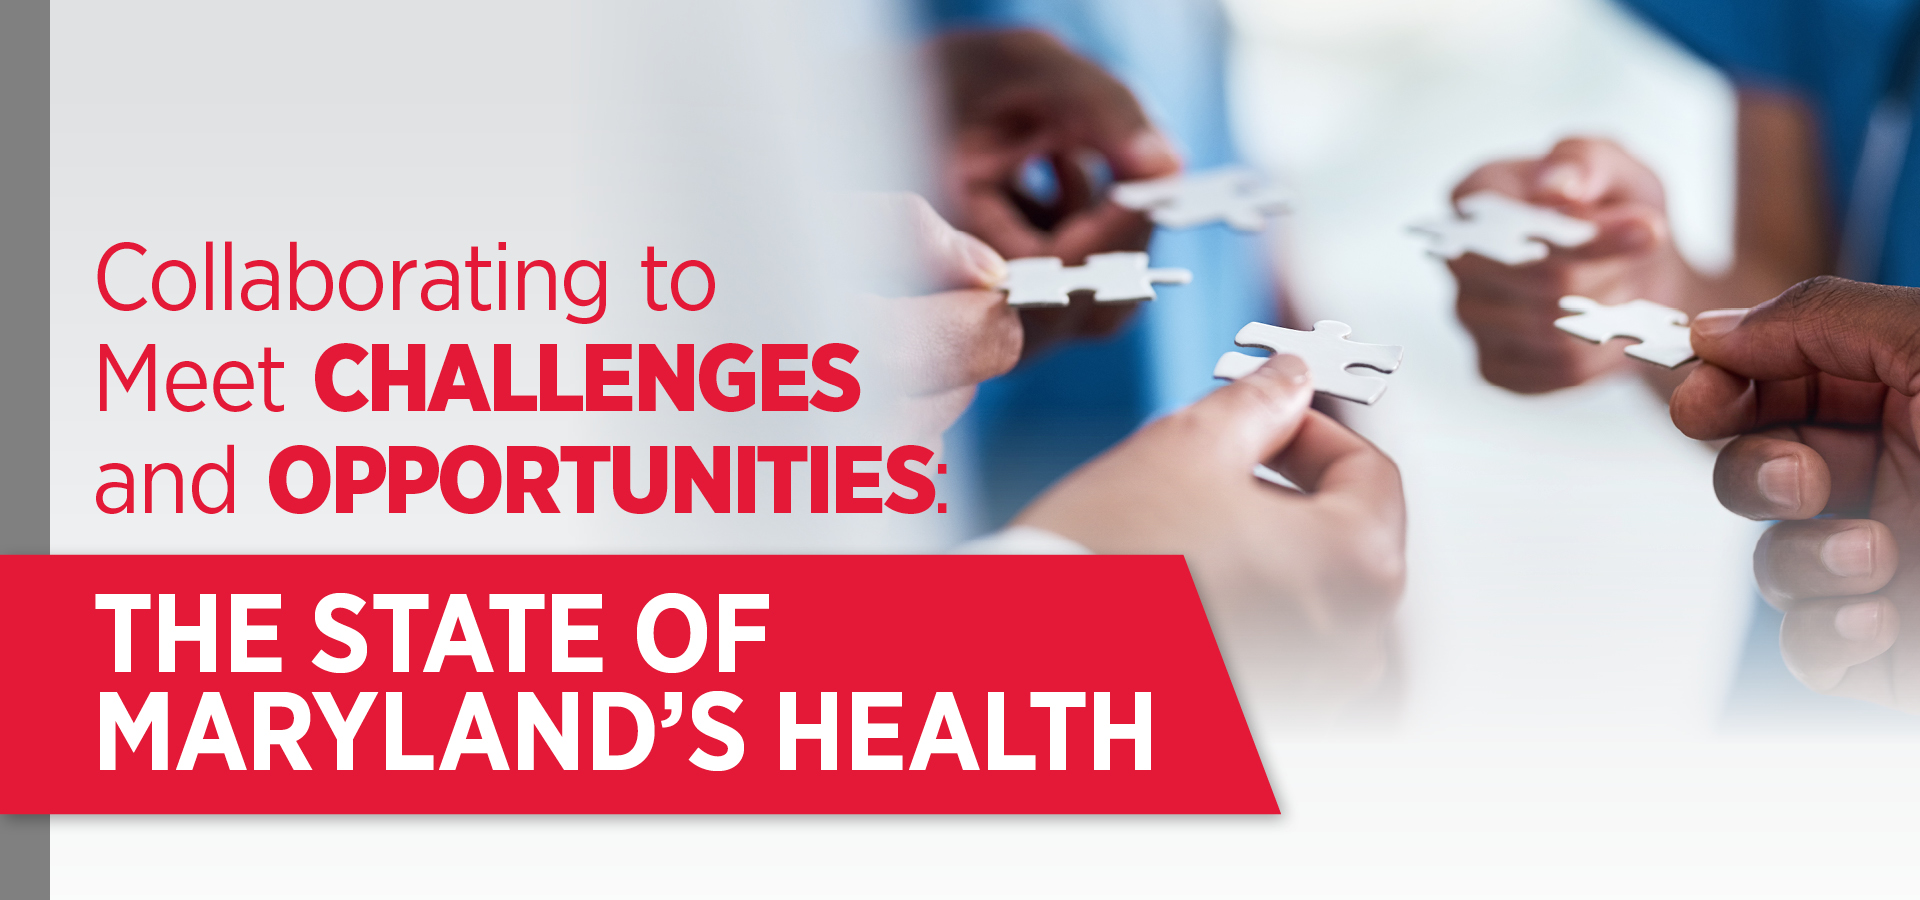 Collaborating to Meet Challenges and Opportunities: The State of Maryland's Health with image of diverse hands holding puzzle pieces